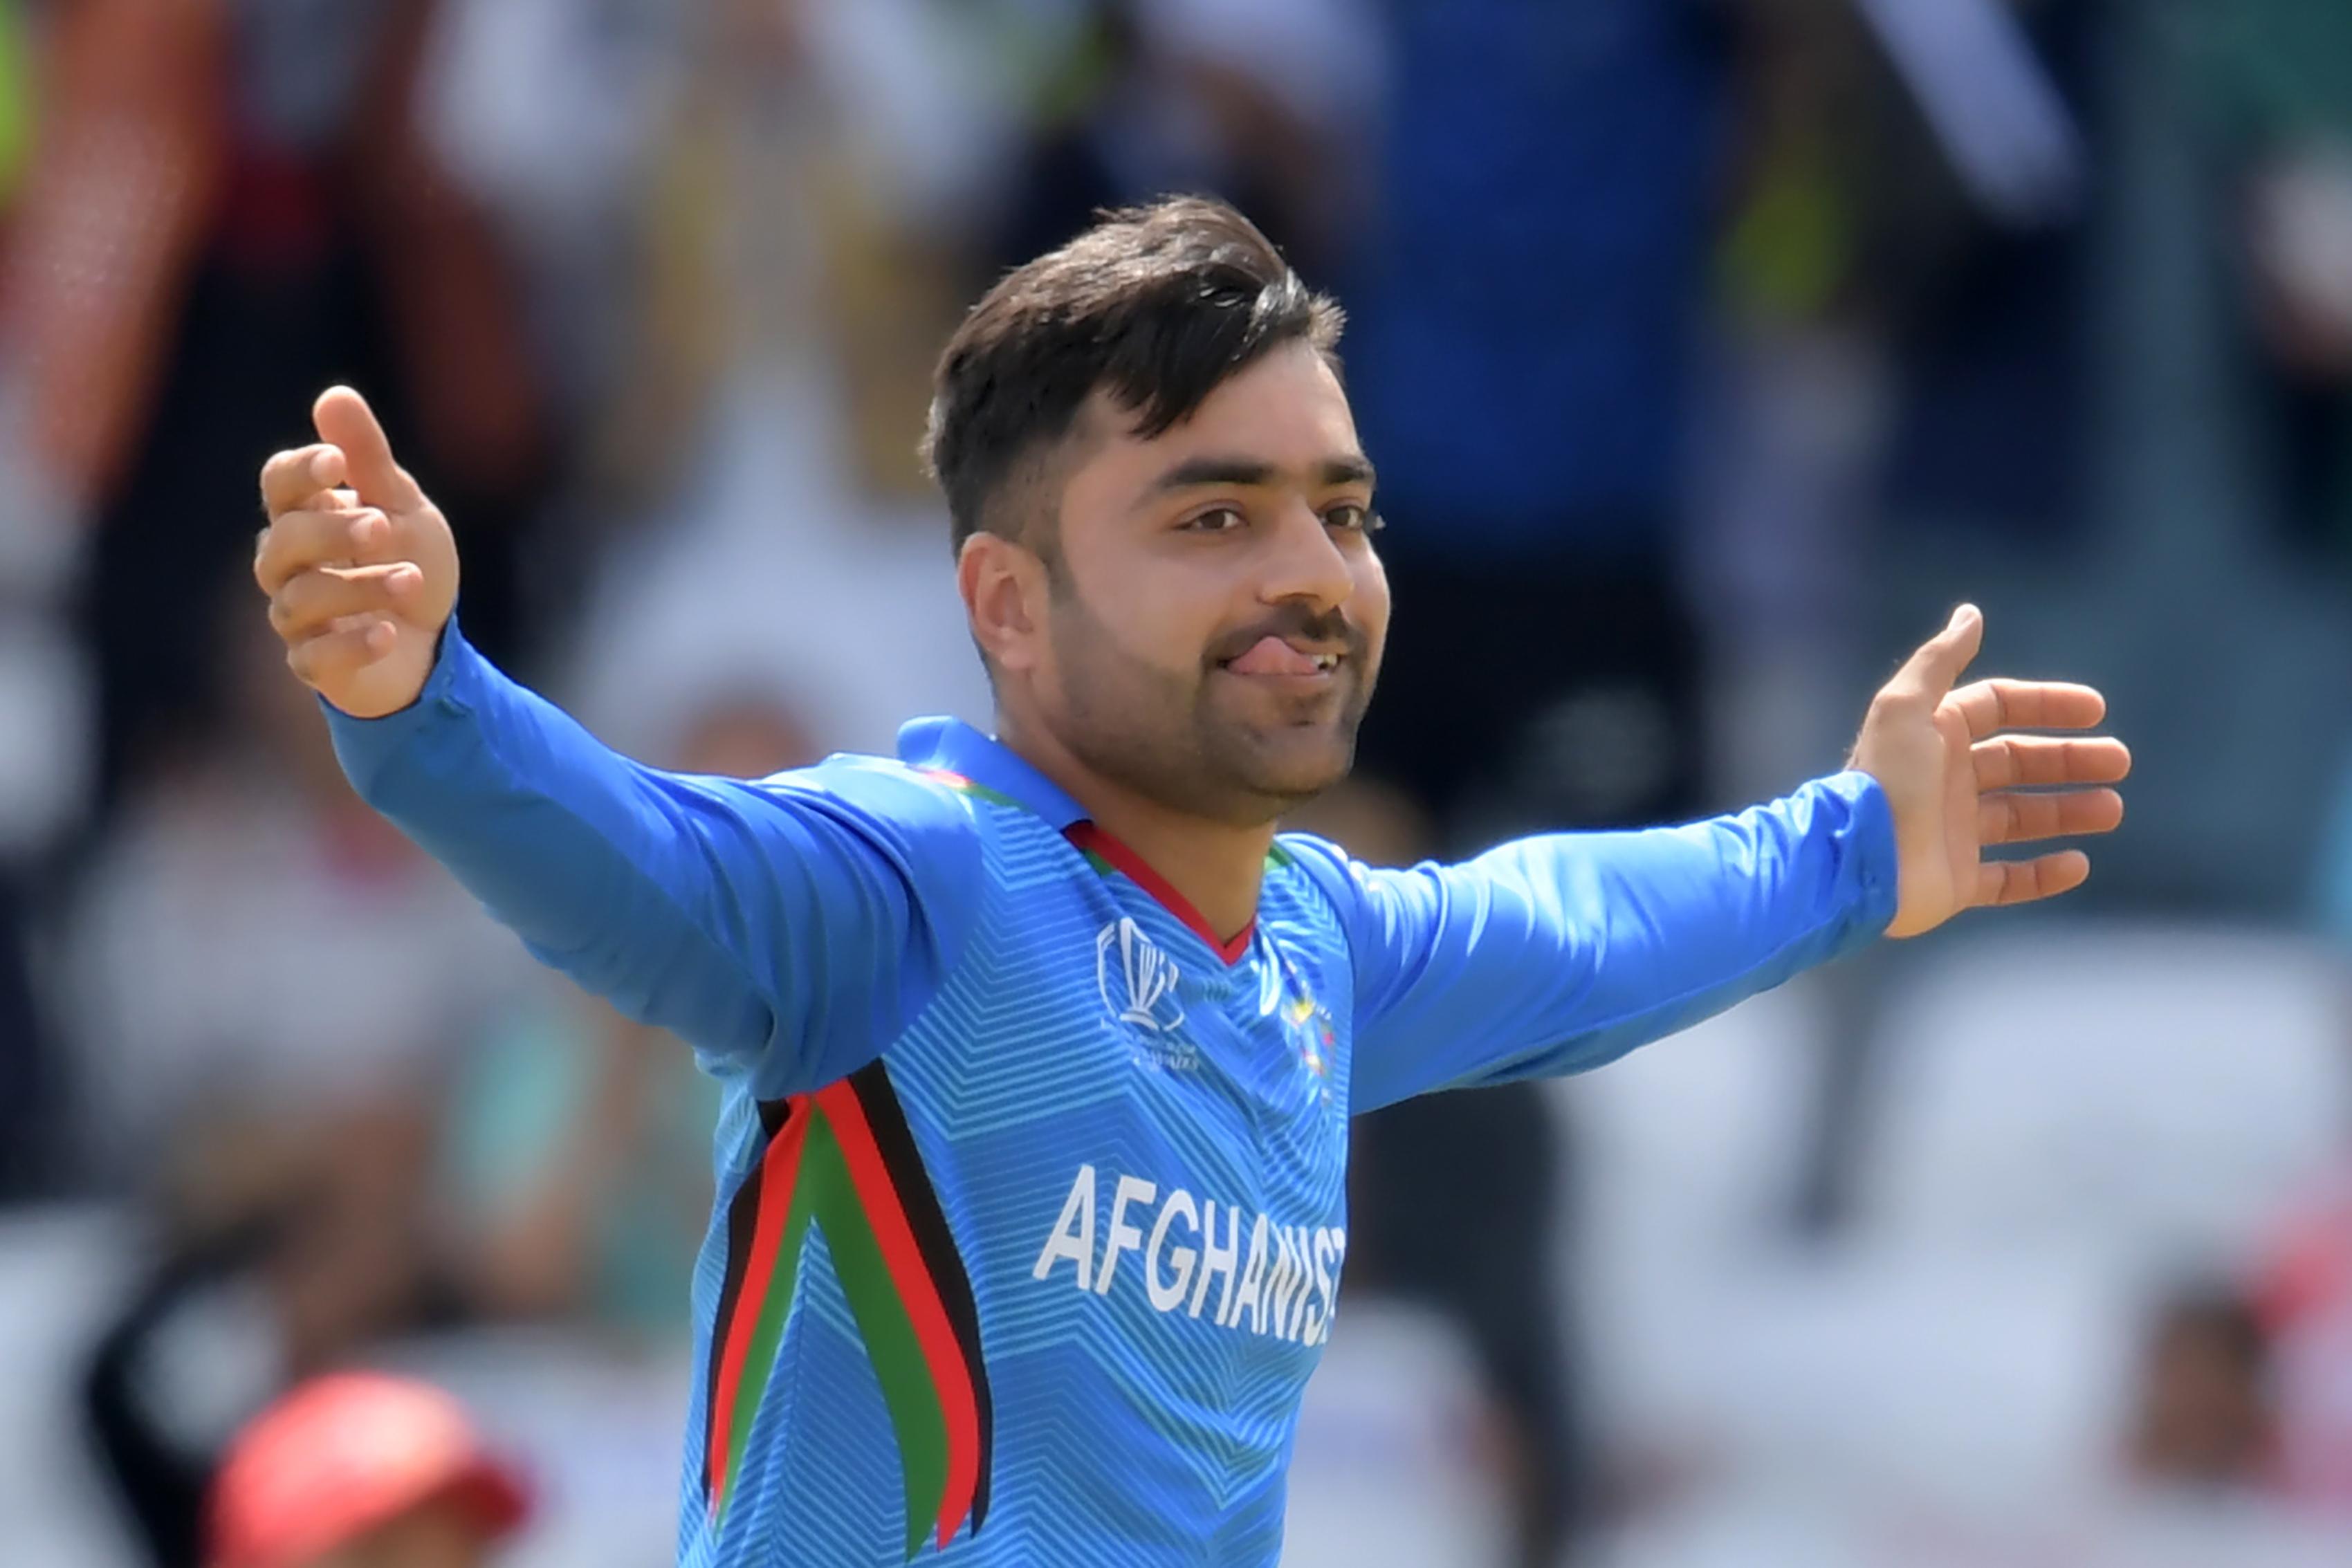 T20 World Cup | 'Bhai don't worry', says Rashid Khan's in cheeky reply to Ashwin ahead of Afghanistan vs New Zealand clash 